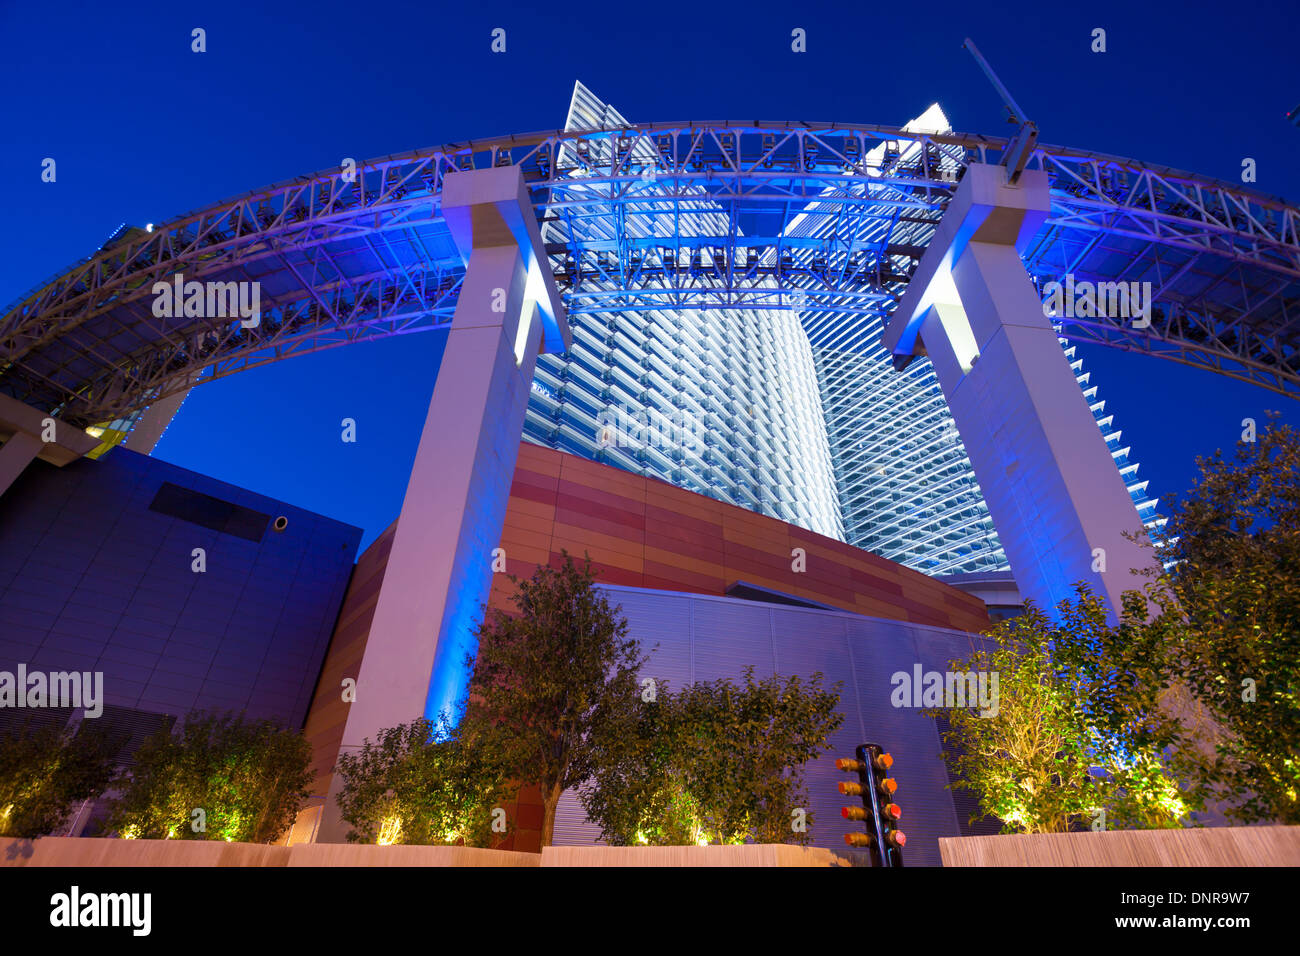 Night time / evening shot of the tram / monorail connecting the Aria hotel & casino in Las Vegas with the Crystals shopping mall Stock Photo